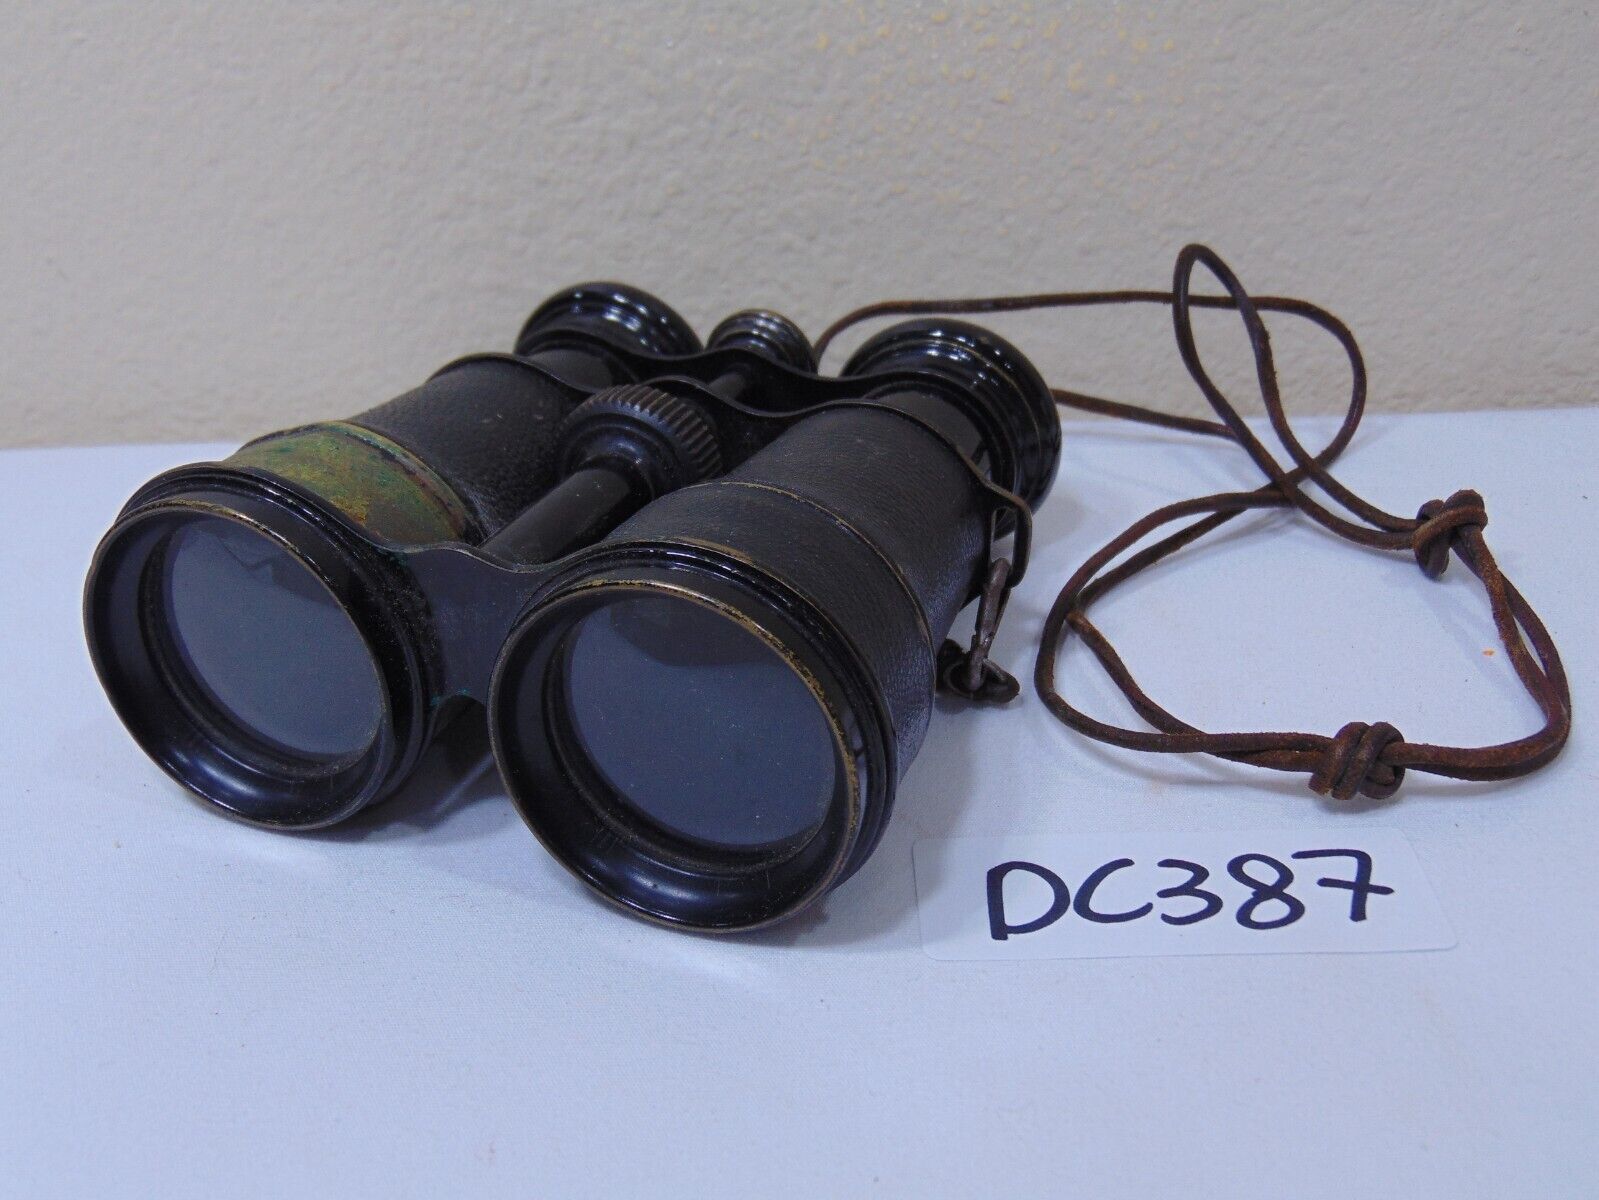 WWI CHAMPOUX PARIS TRENCH BINOCULARS WITH FIELD COMPASS MUSEUM RELIC VINTAGE